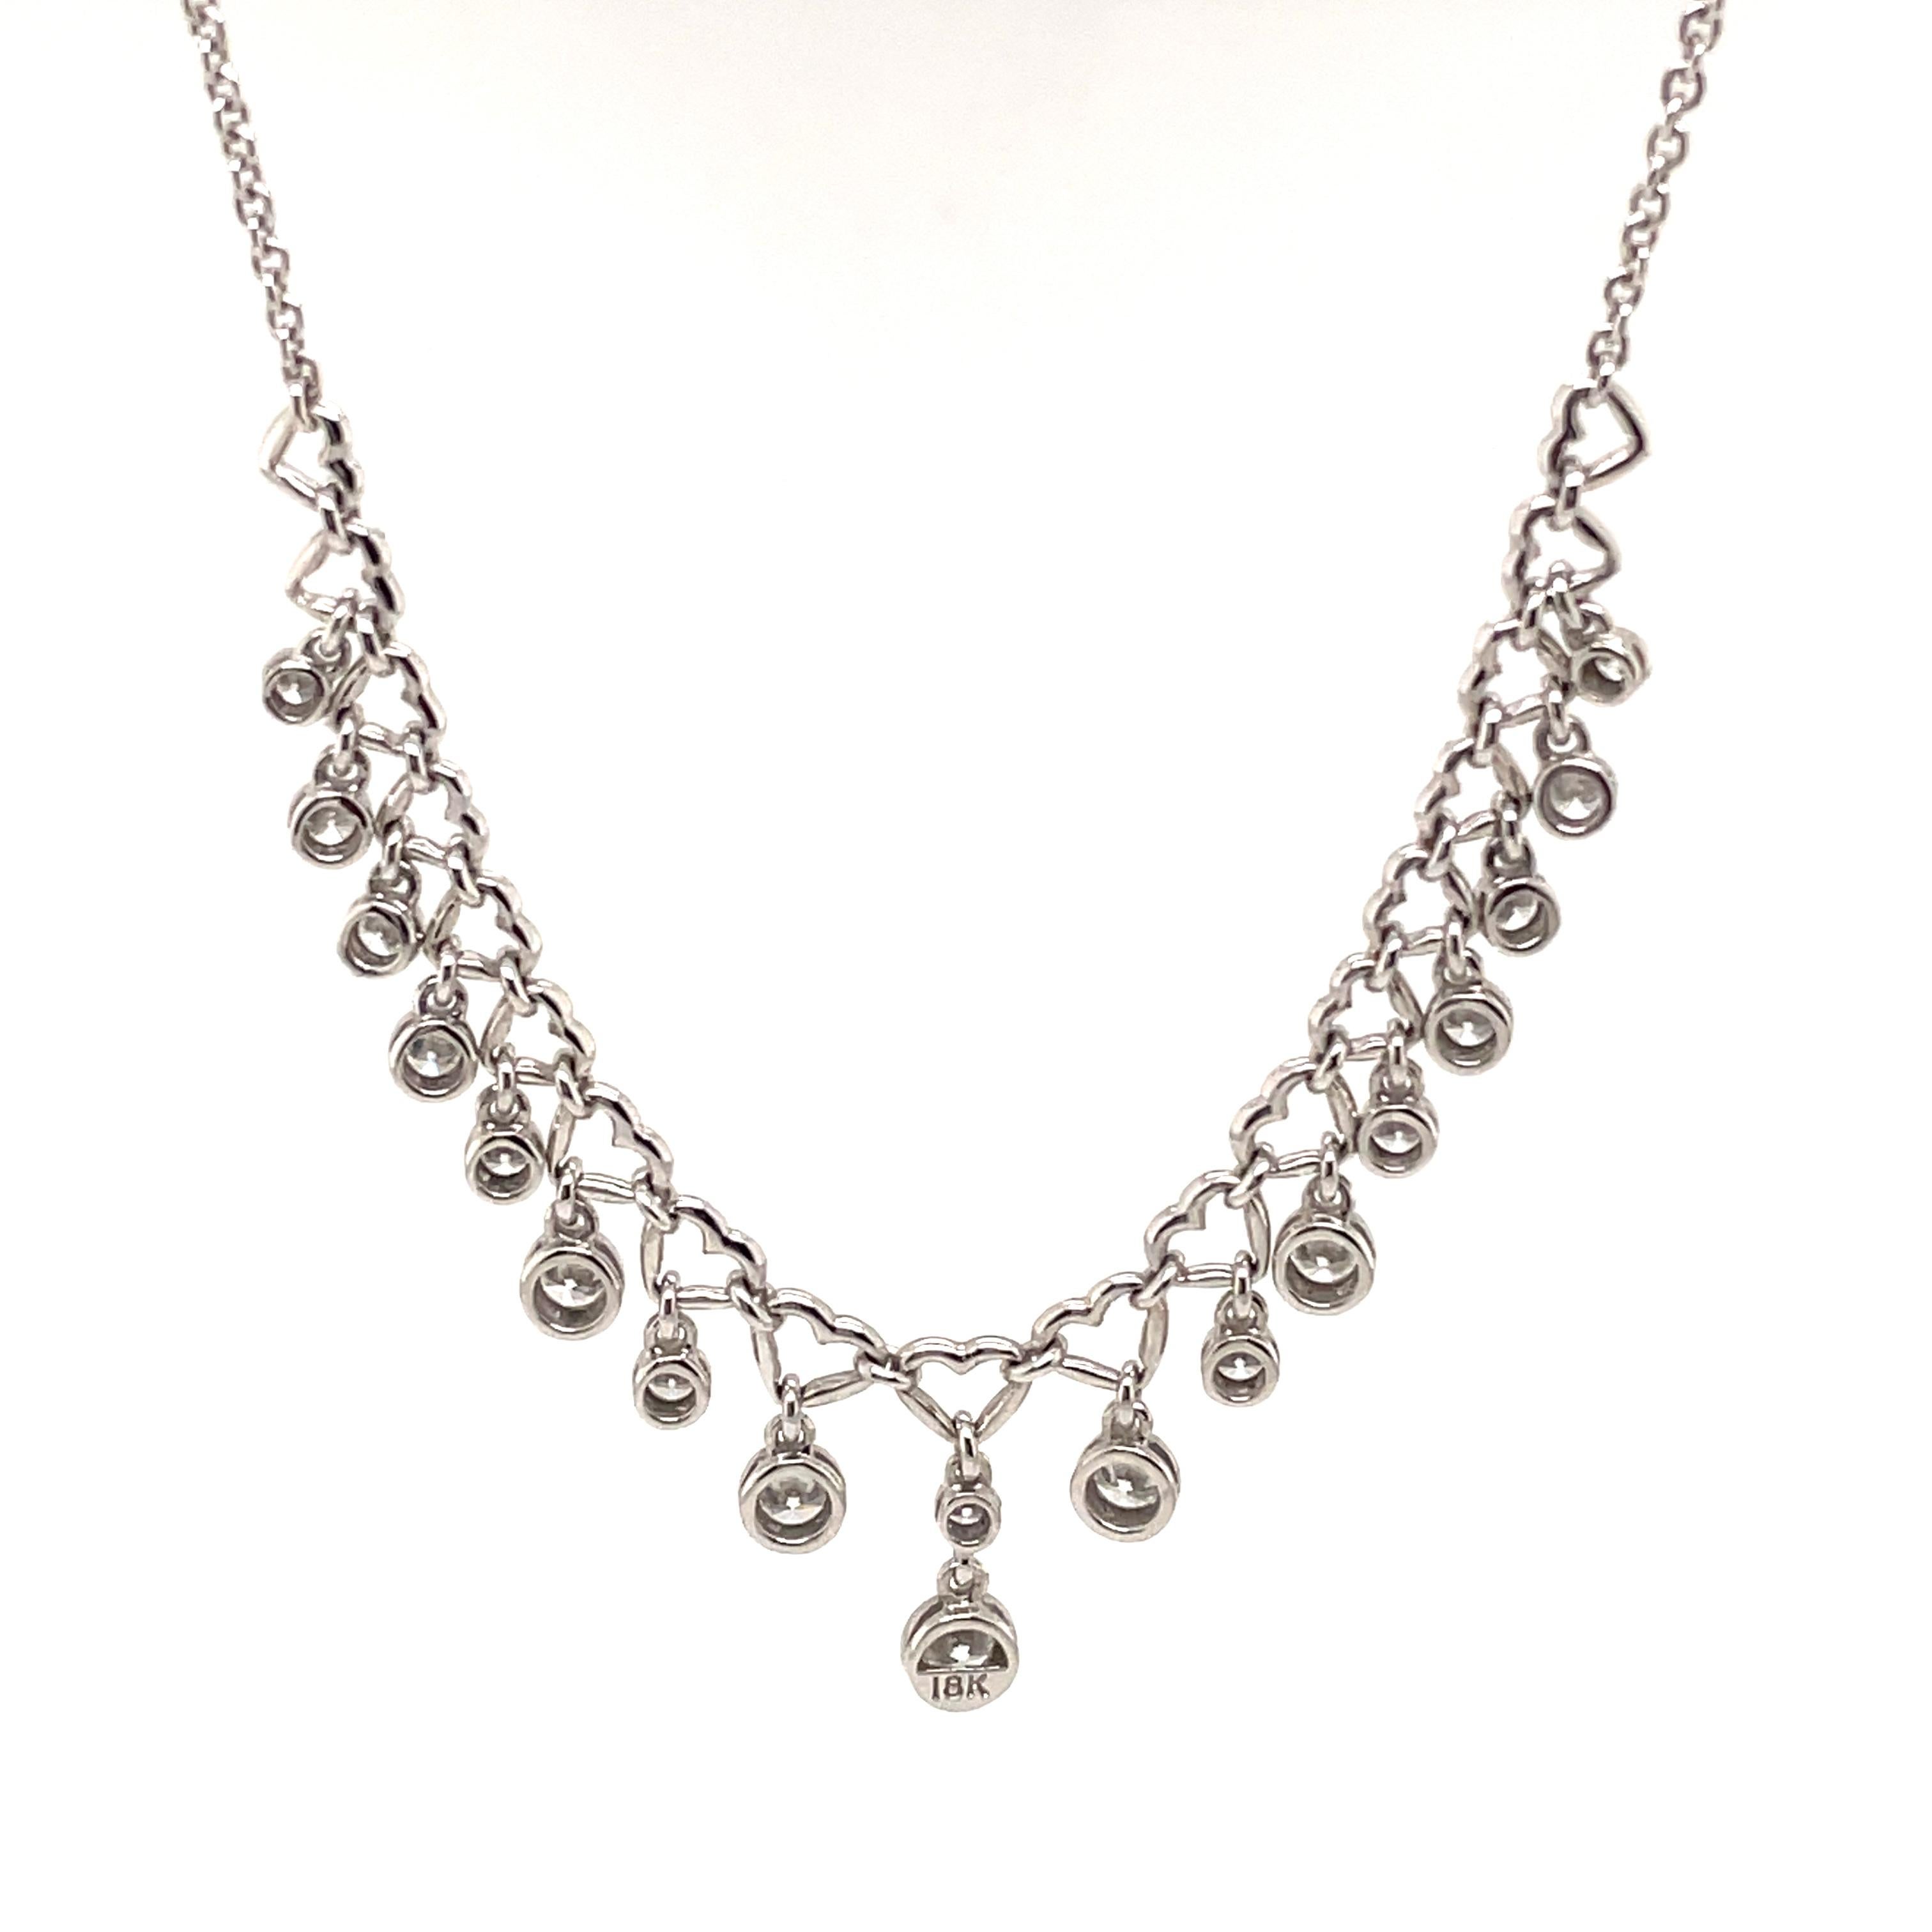 1.13ct Dangling Bezel Set Diamond Necklace 18k White Gold In New Condition For Sale In BEVERLY HILLS, CA